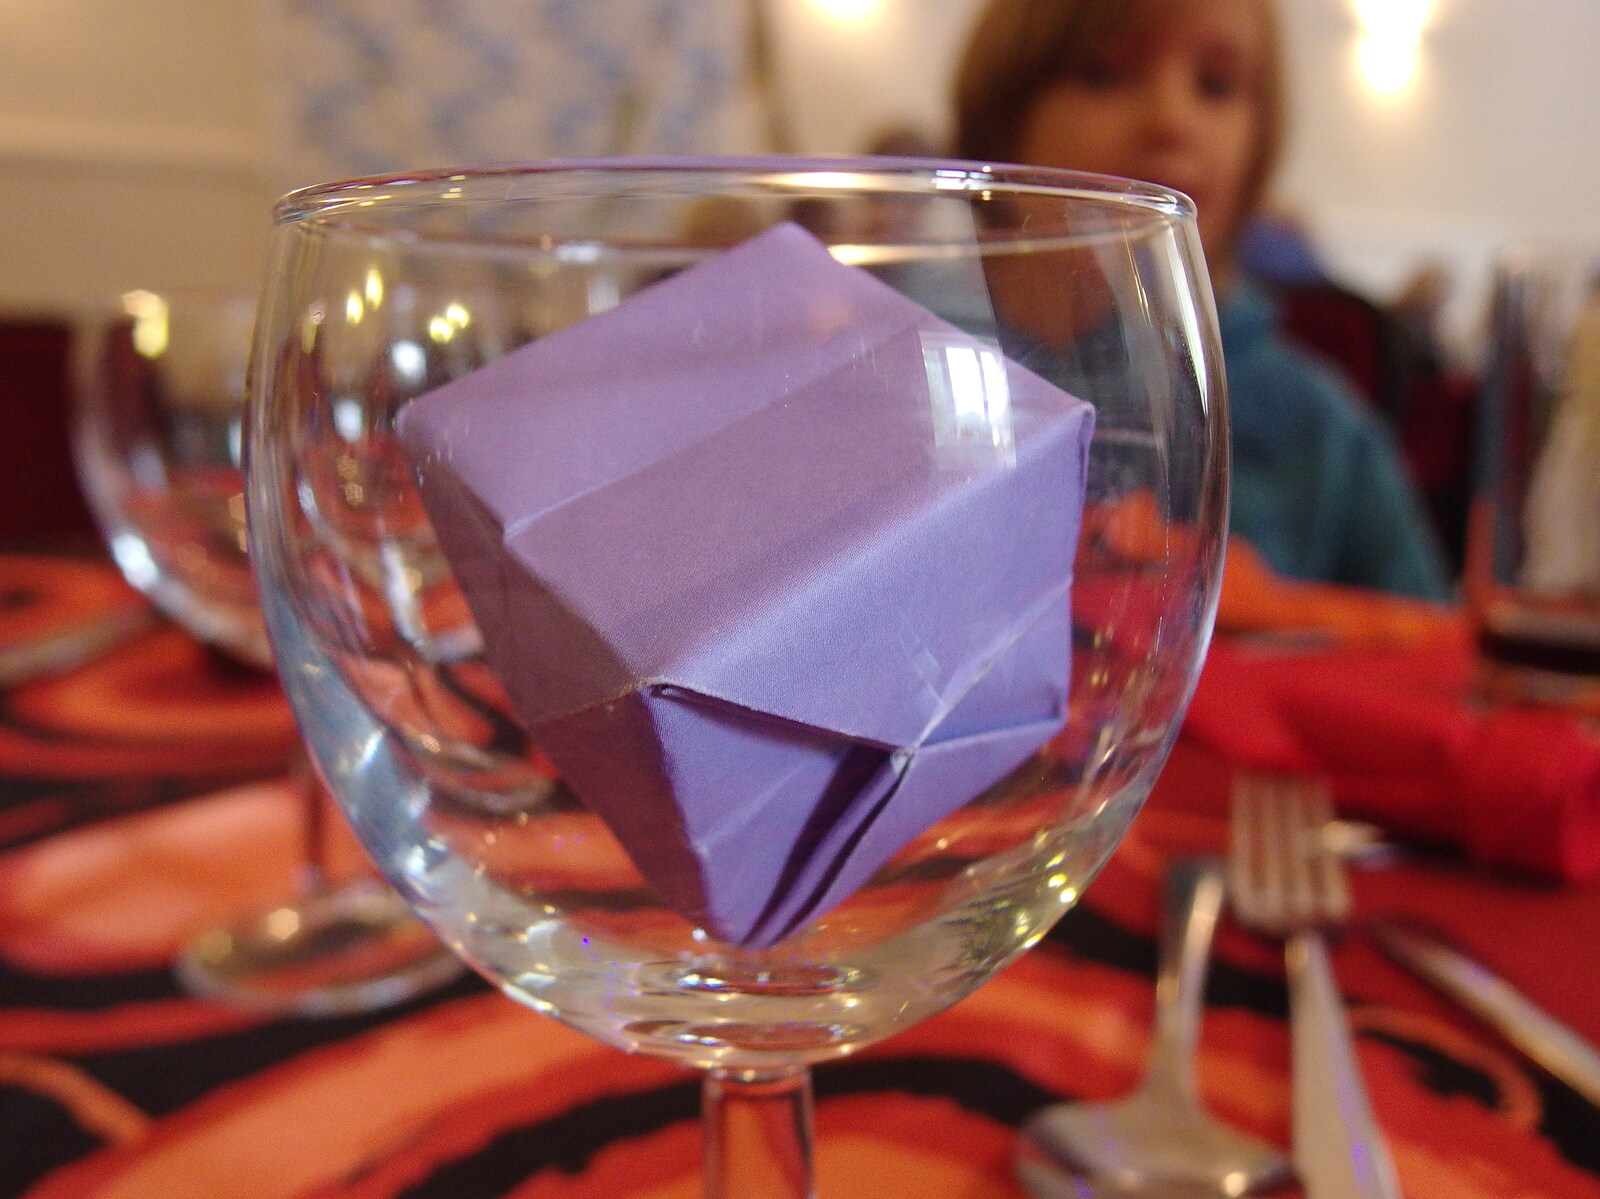 One of Fred's Origami boxes in a wine glass from Sunday Lunch at the Village Hall, Brome, Suffolk - 10th October 2021